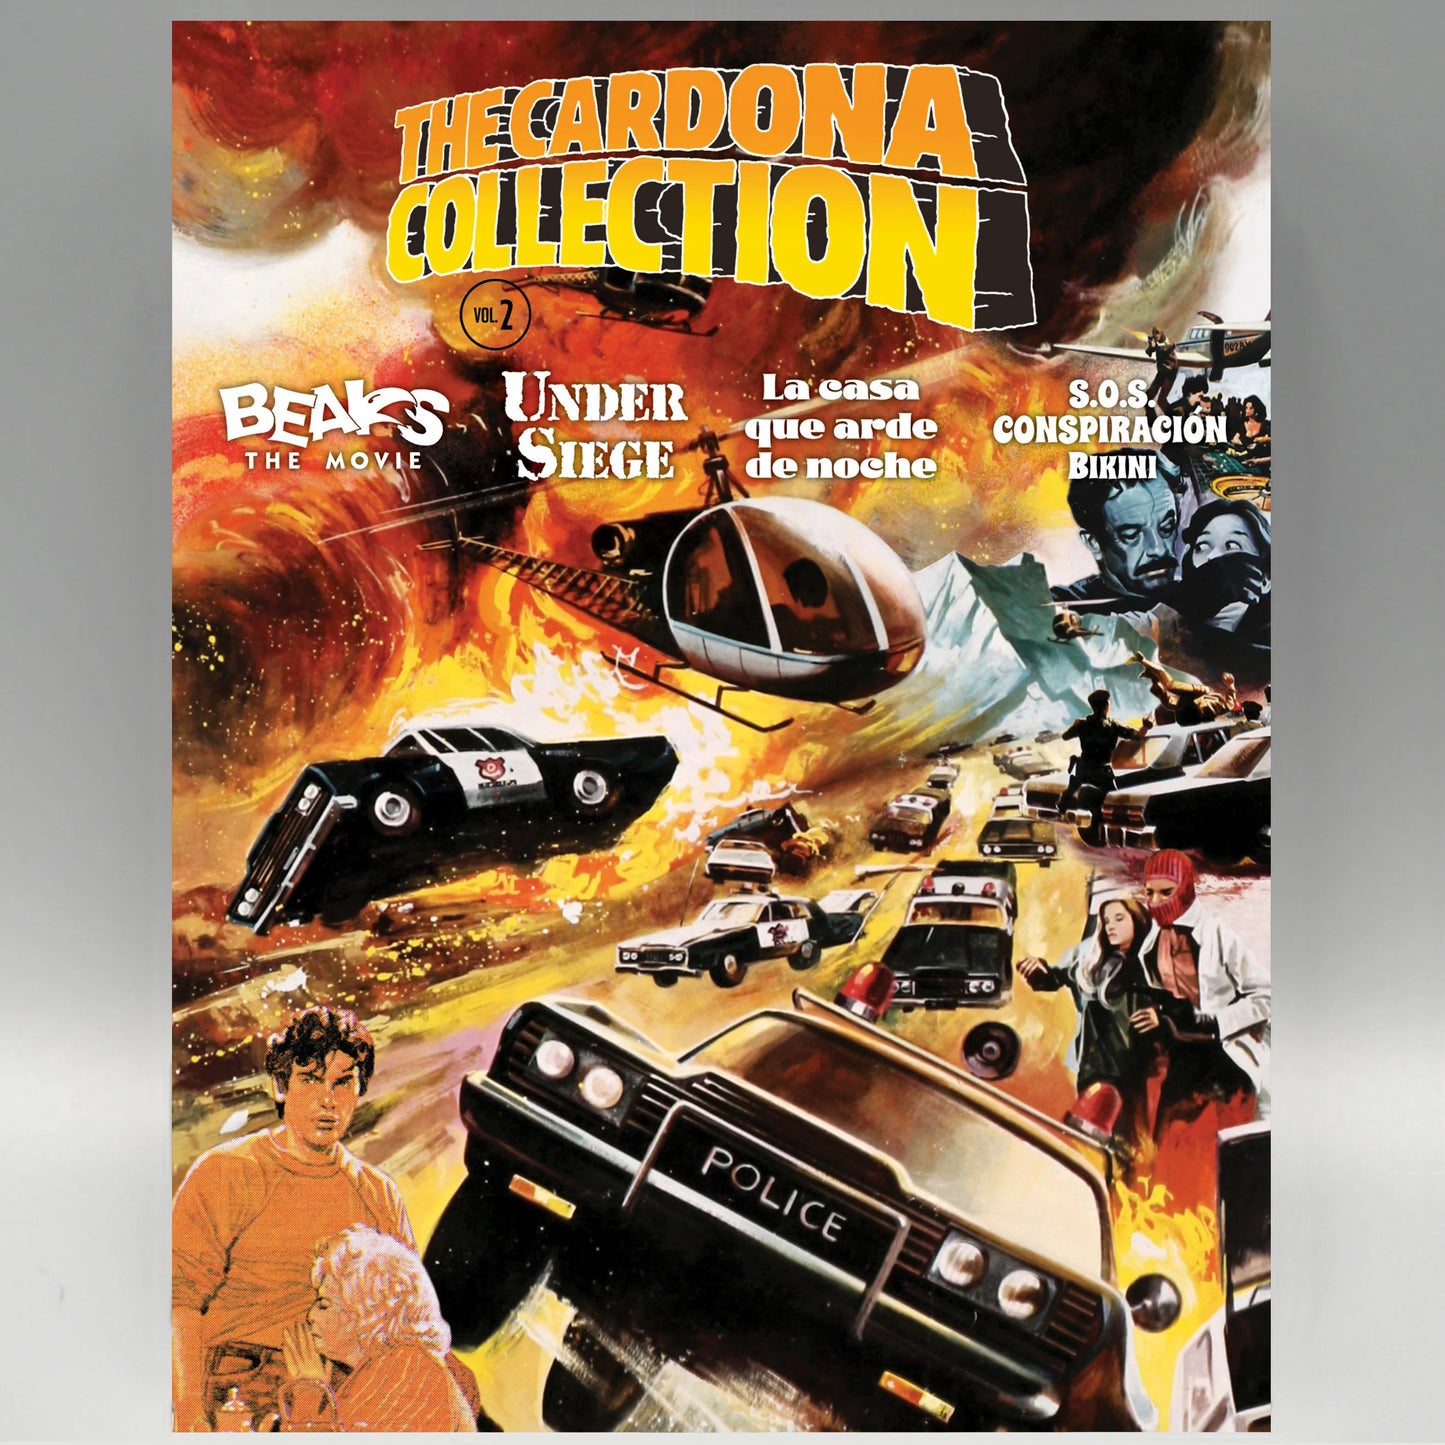 The Cardona Collection: Volume Two Blu-ray with Limited Edition Slipcover (Vinegar Syndrome)